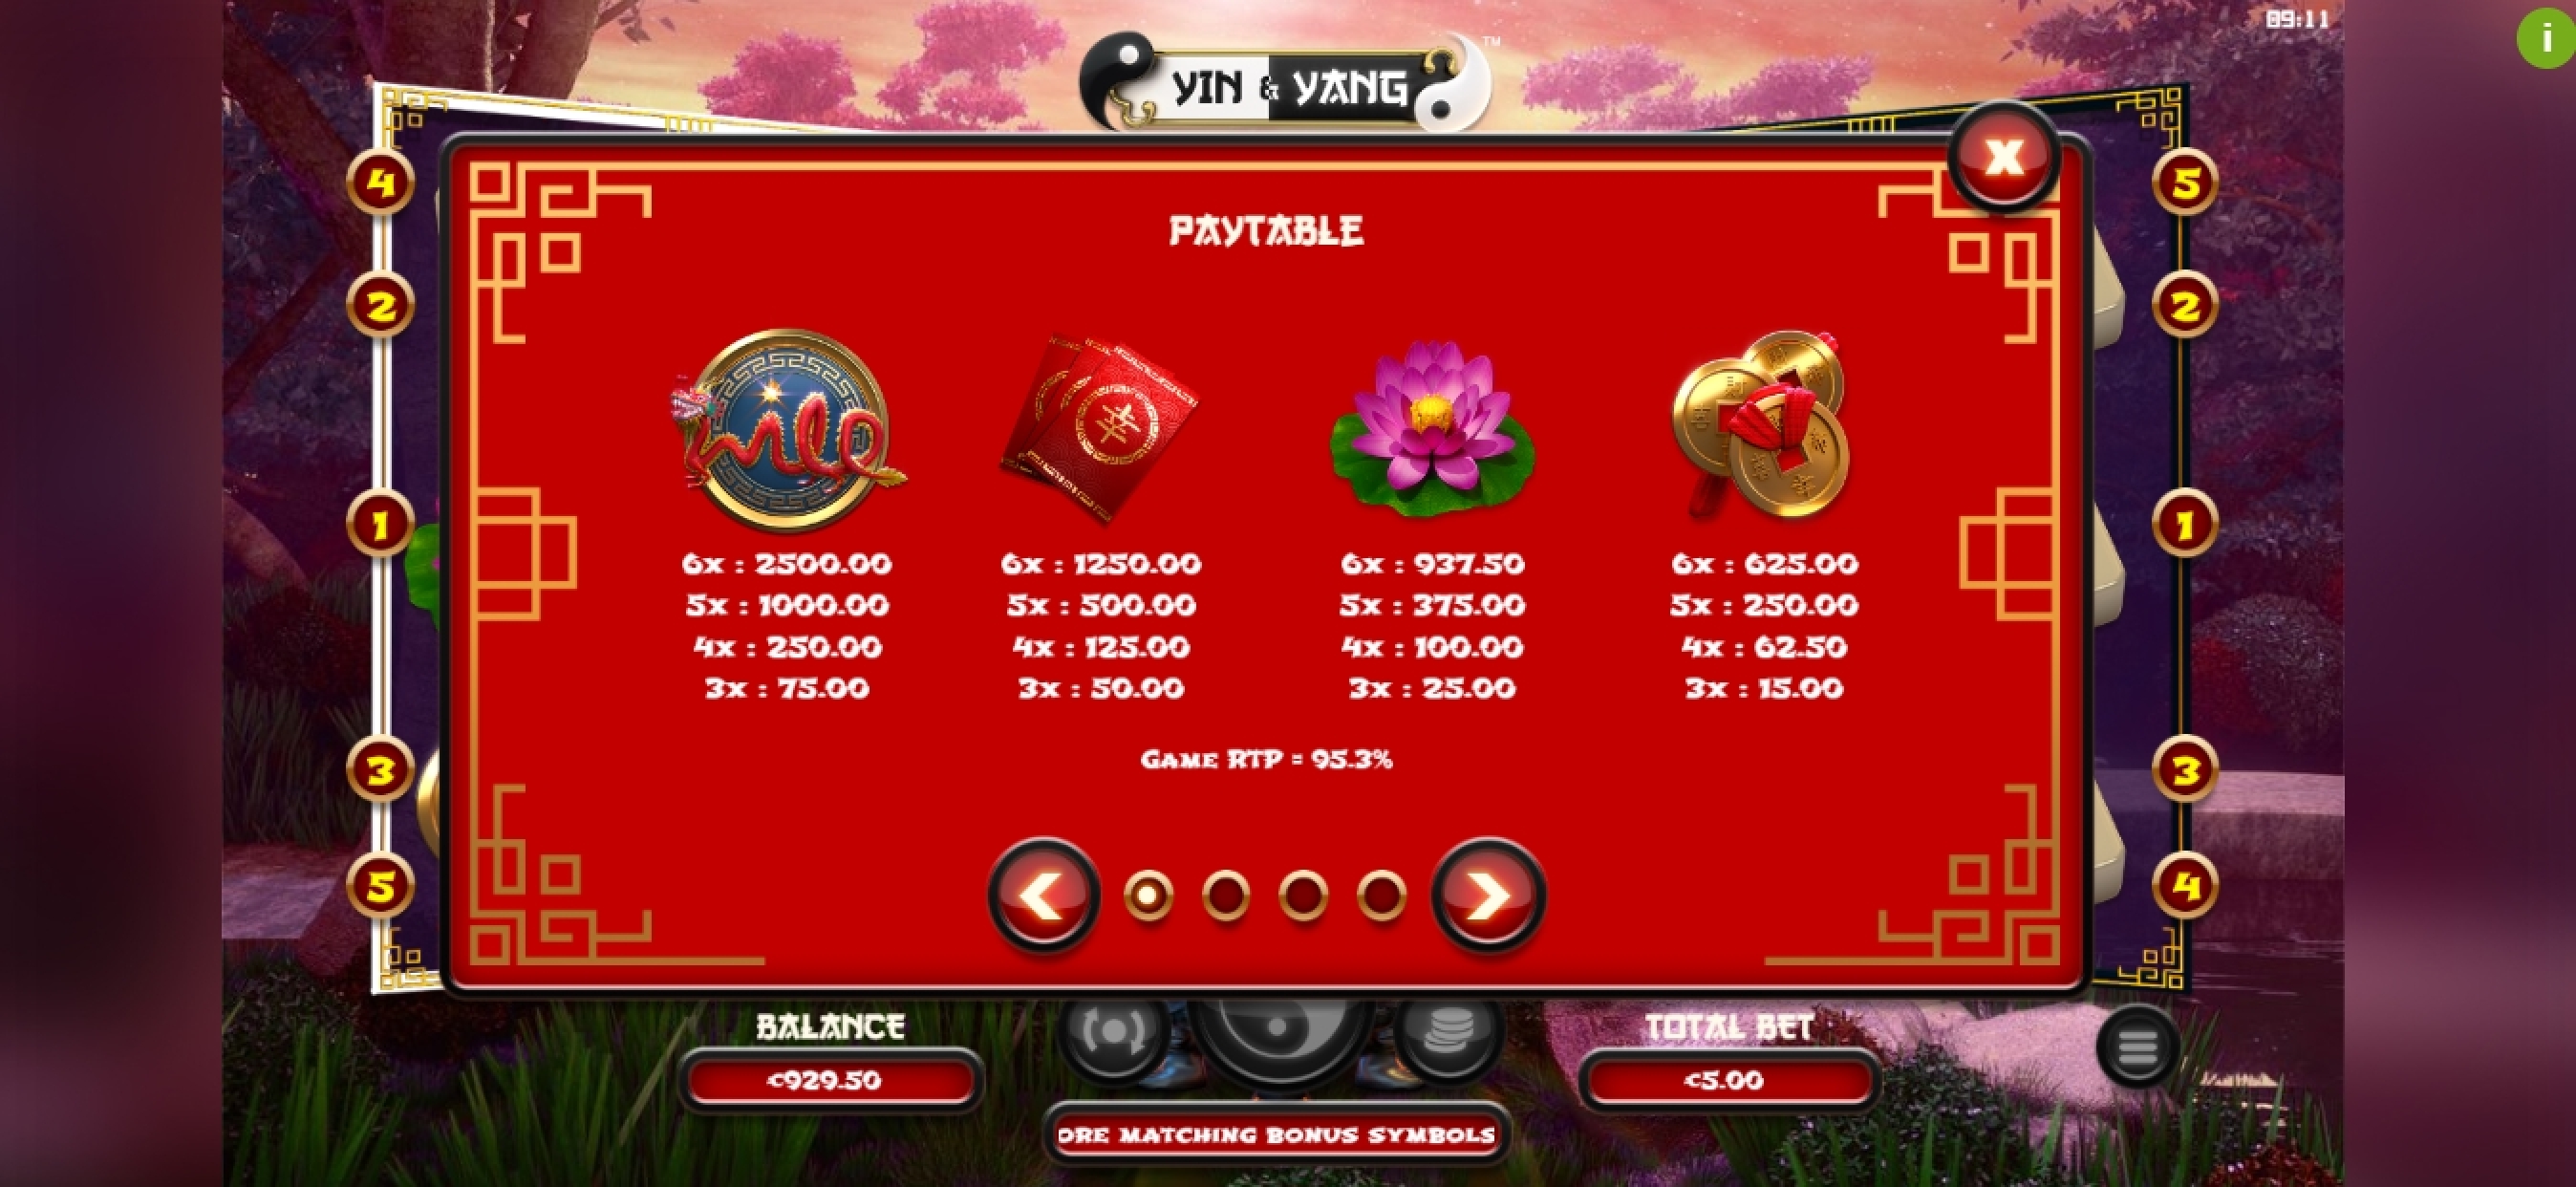 Info of Yin & Yang Slot Game by BB Games